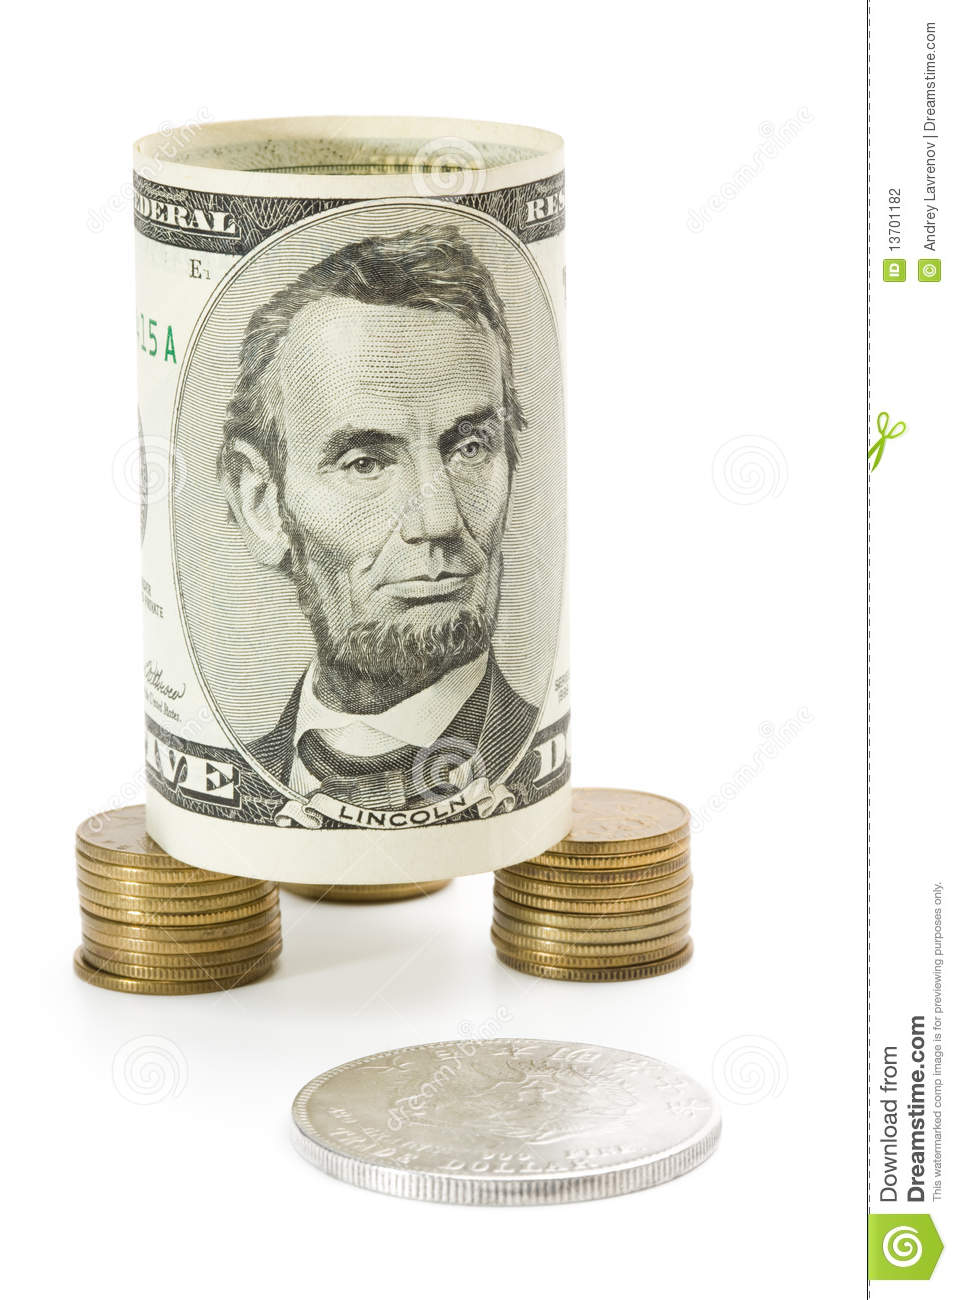 Five Dollar Bill Over Stack Of Coins Stock Photography   Image    